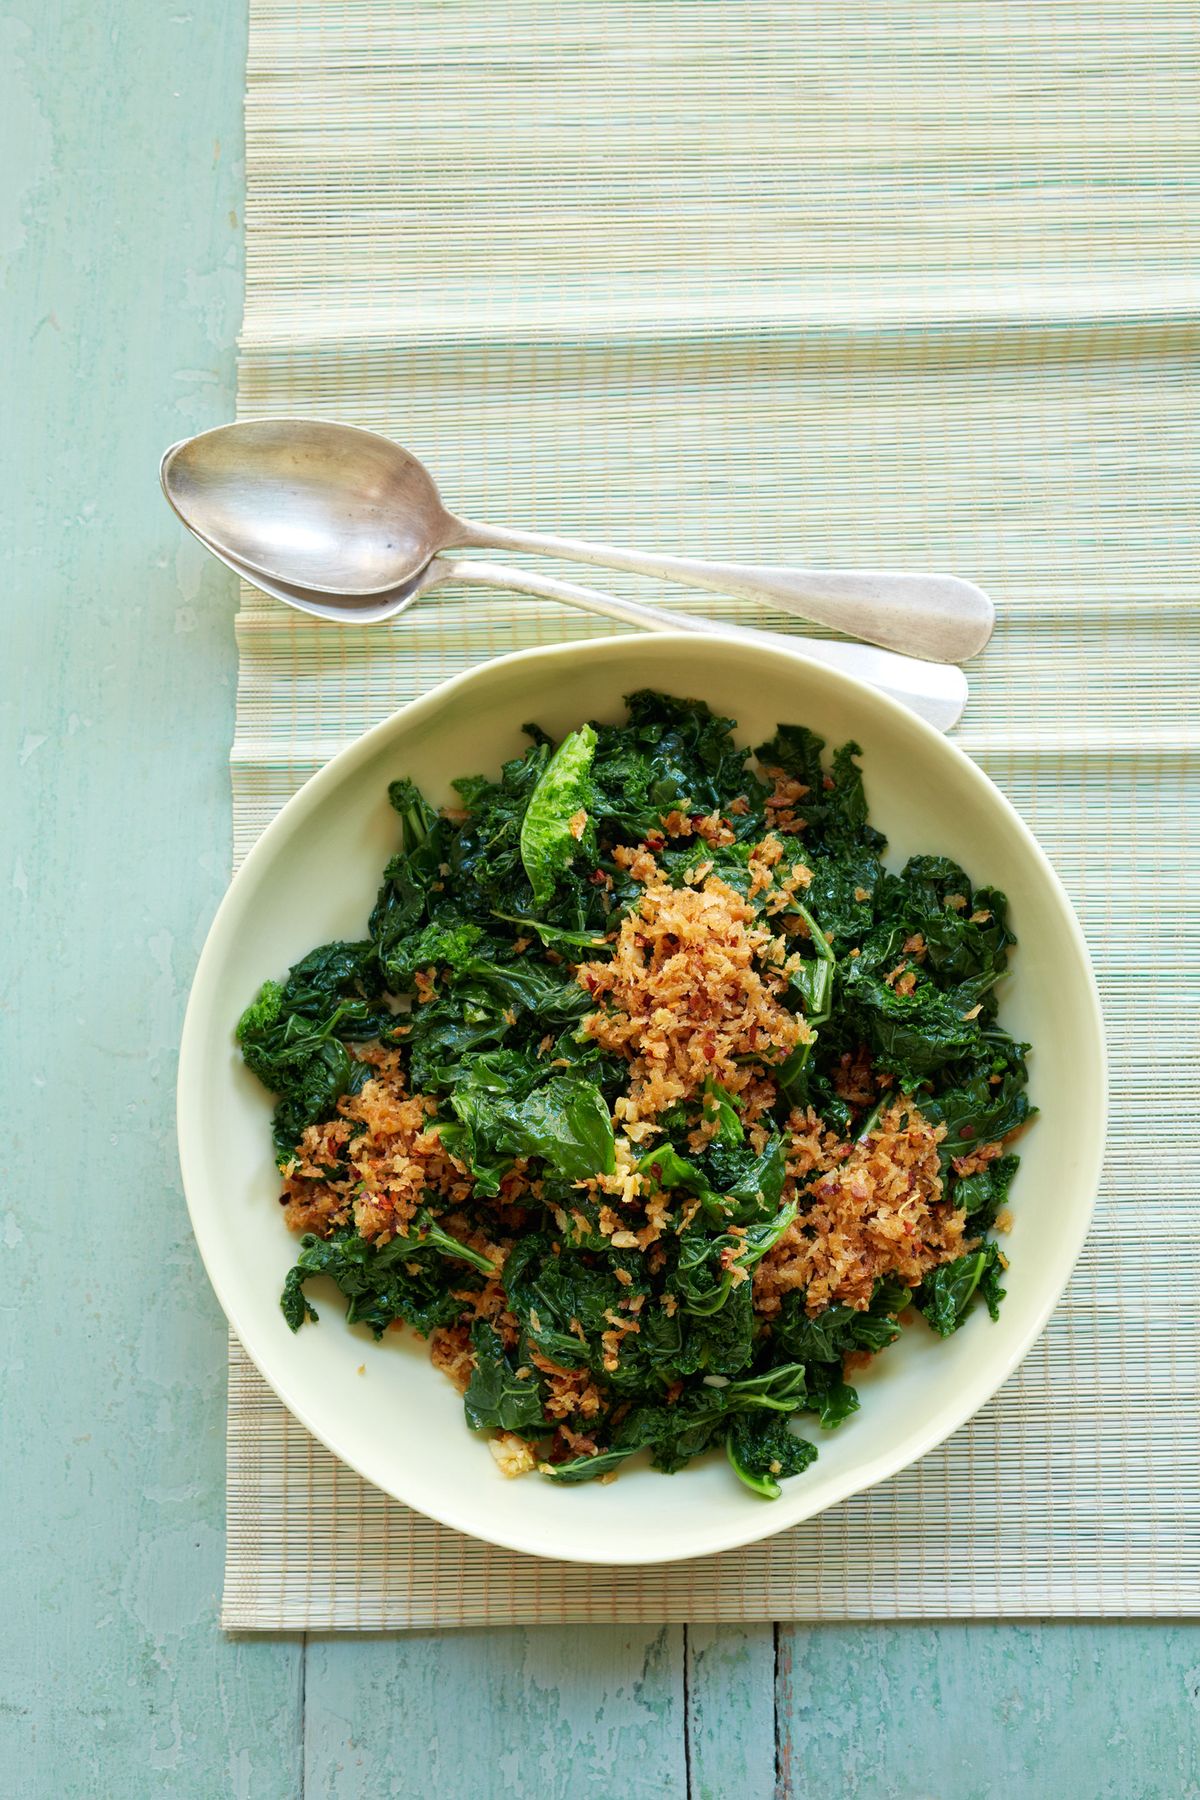 sauteed kale and garlicky bread crumbs